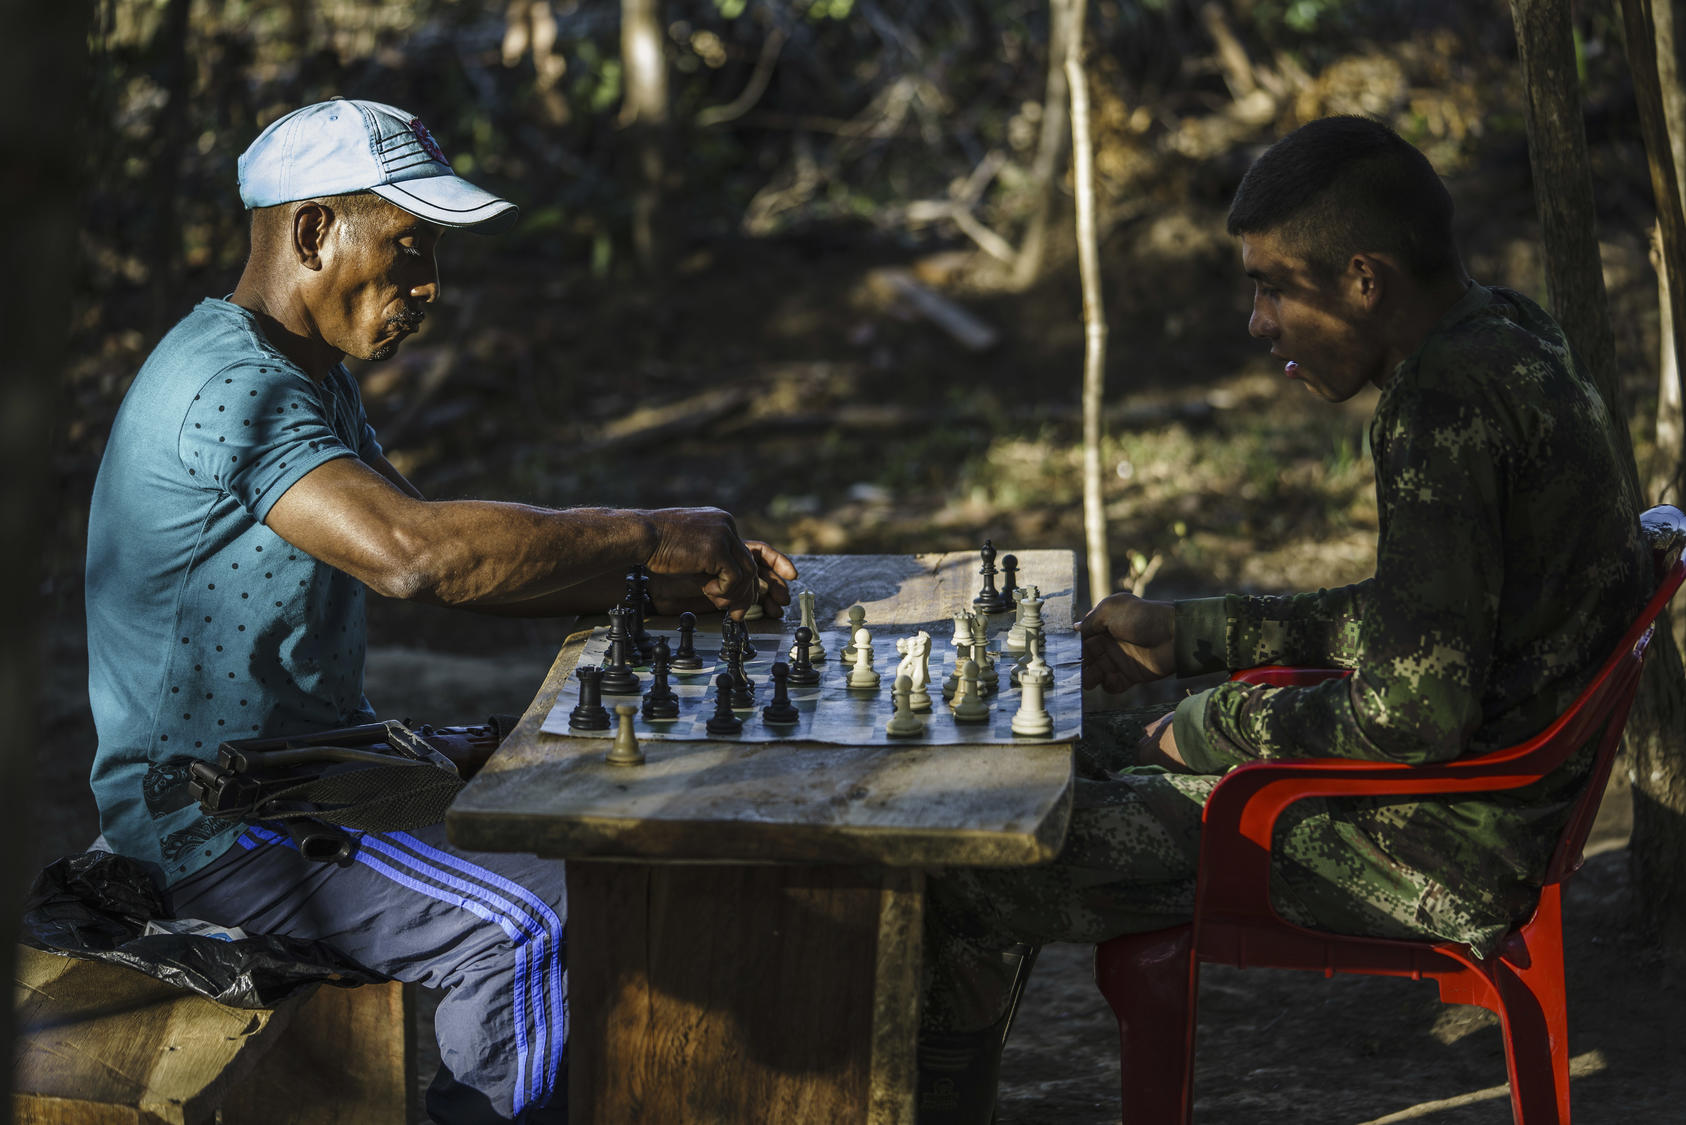 FARC members play chess in one of the zones set up to transition the former rebels back to civilian life, near La Paz, Colombia, Feb. 1, 2017. As the peace process moves ahead, mixed feelings in towns like La Paz are clear evidence of lingering divisions and bitter memories of the conflict. (Federico Rios Escobar/The New York Times)